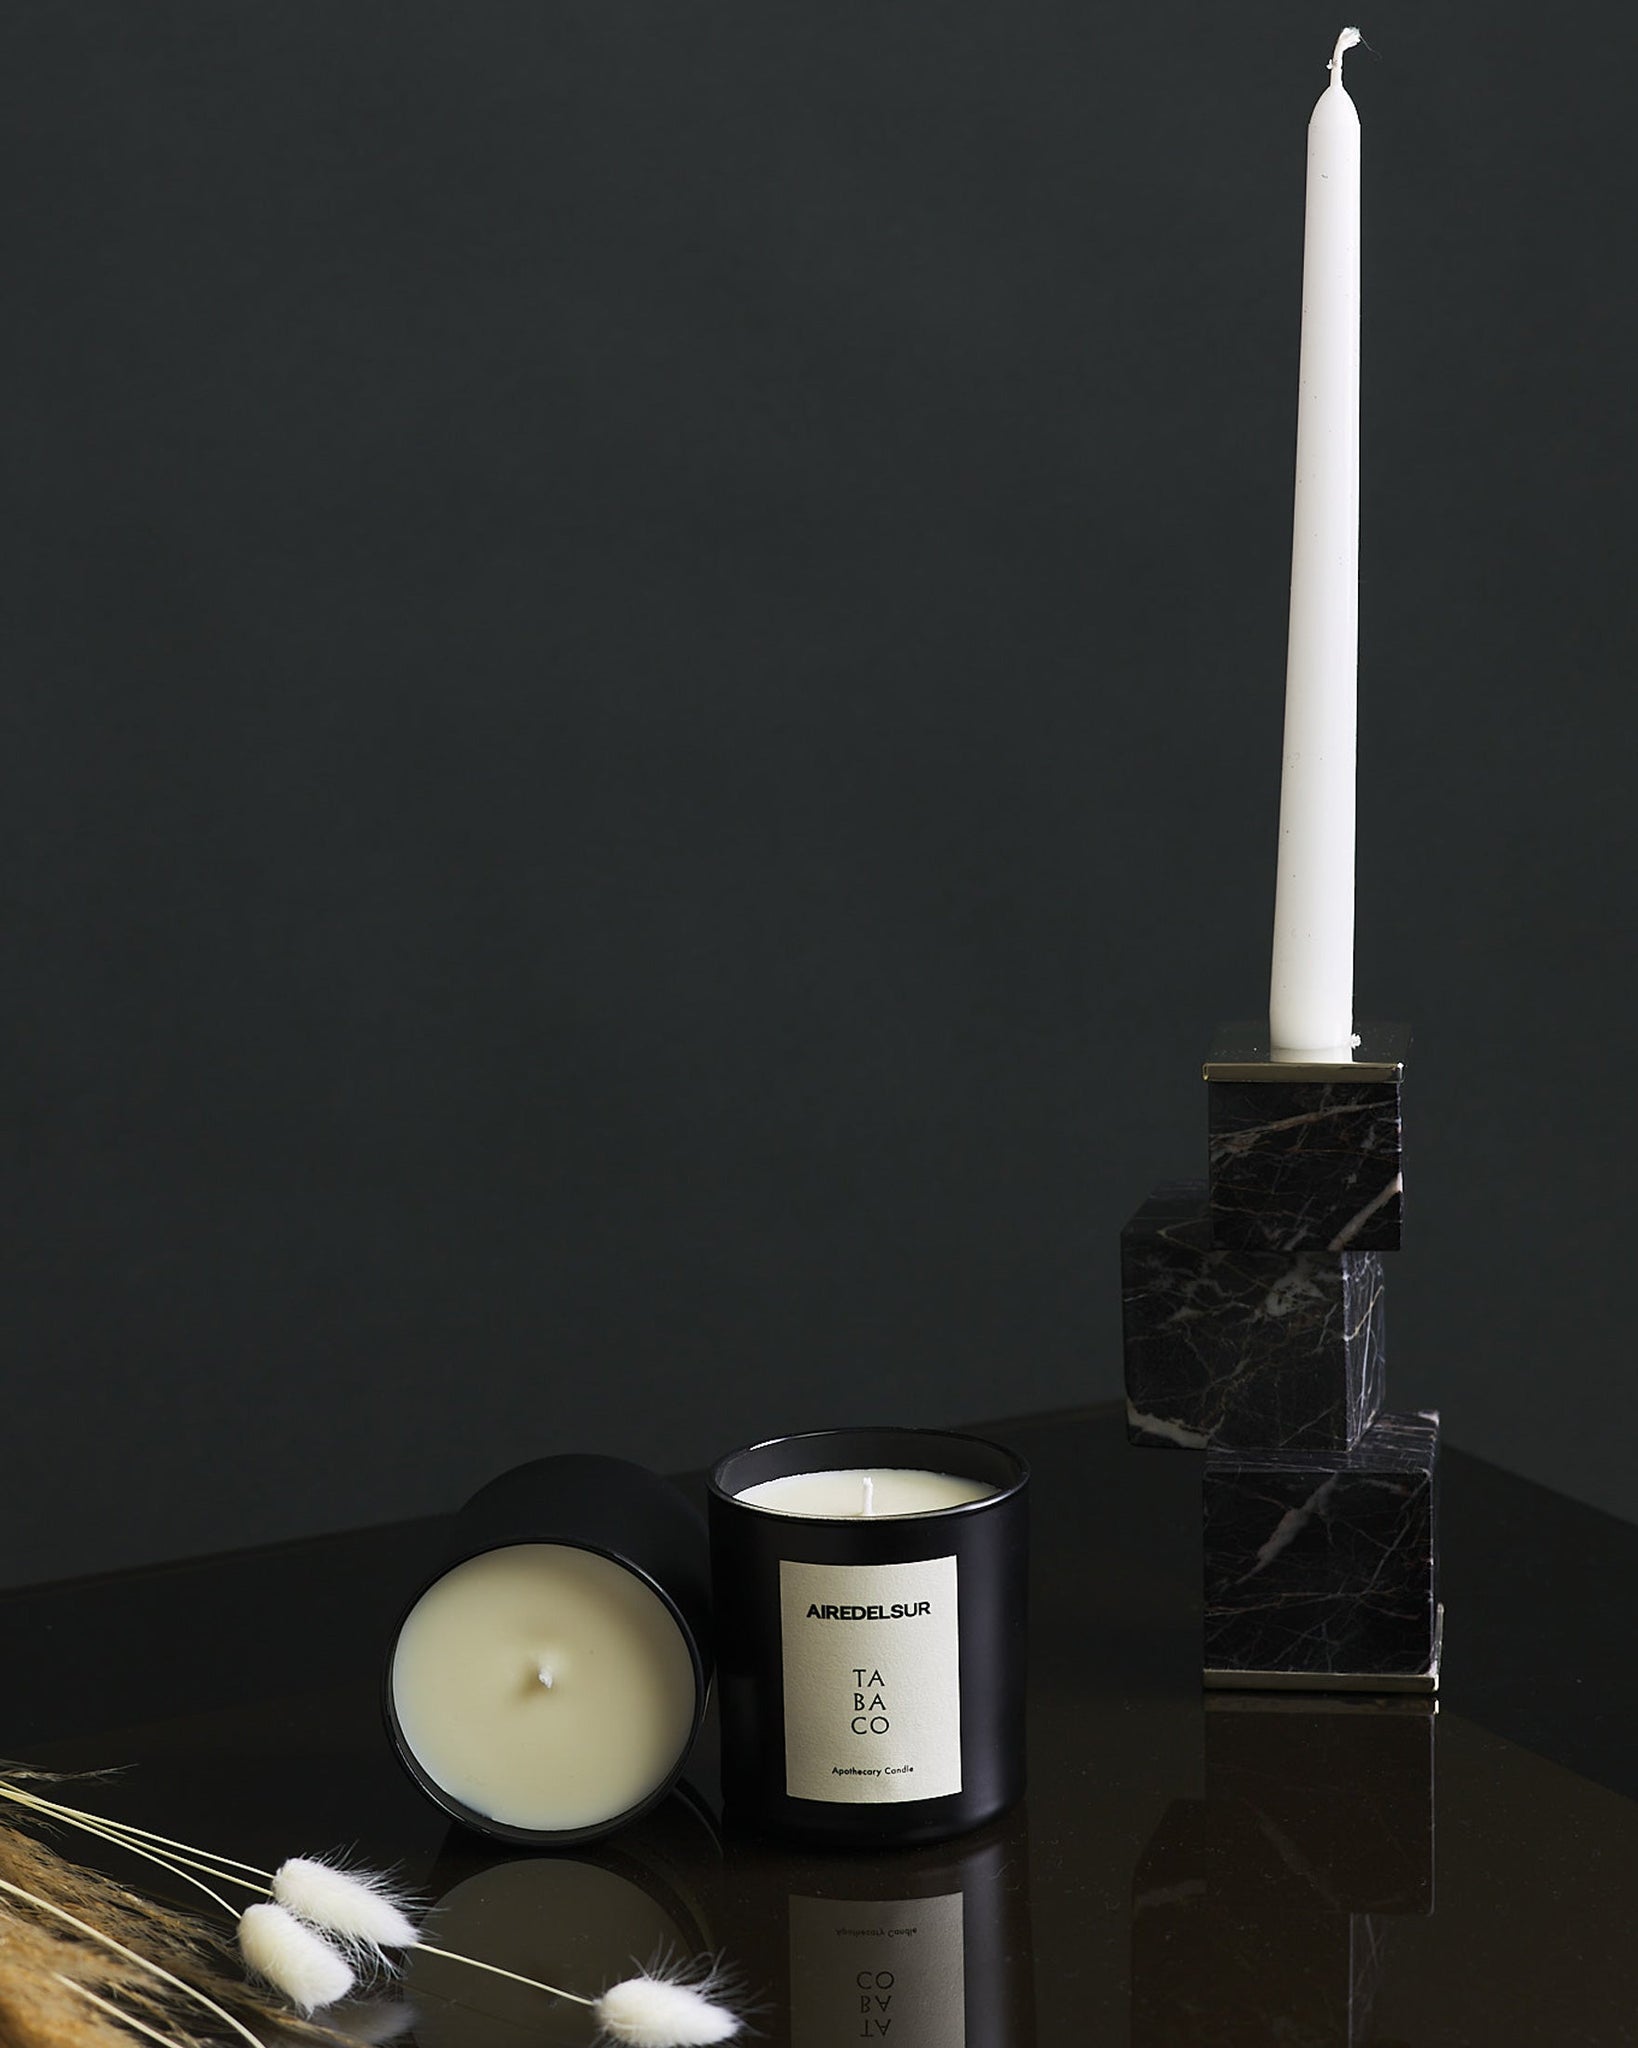 Natural soy wax scented candle made in Argentina